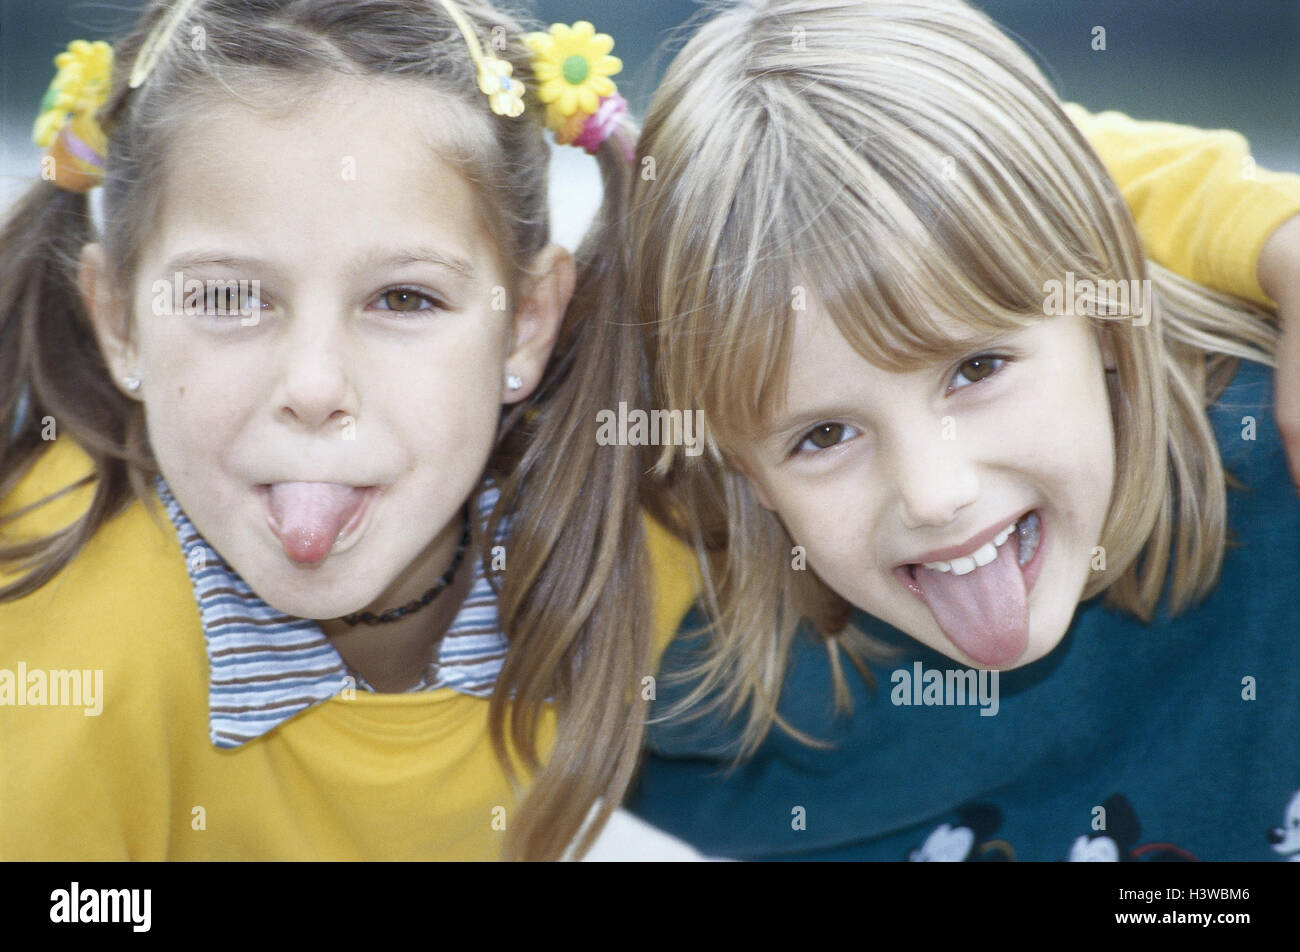 Girls, two, gesture, cheeky, tongue, stick out, portrait, outside, children, disobediently, insults, education, impertinently, naughtily Stock Photo